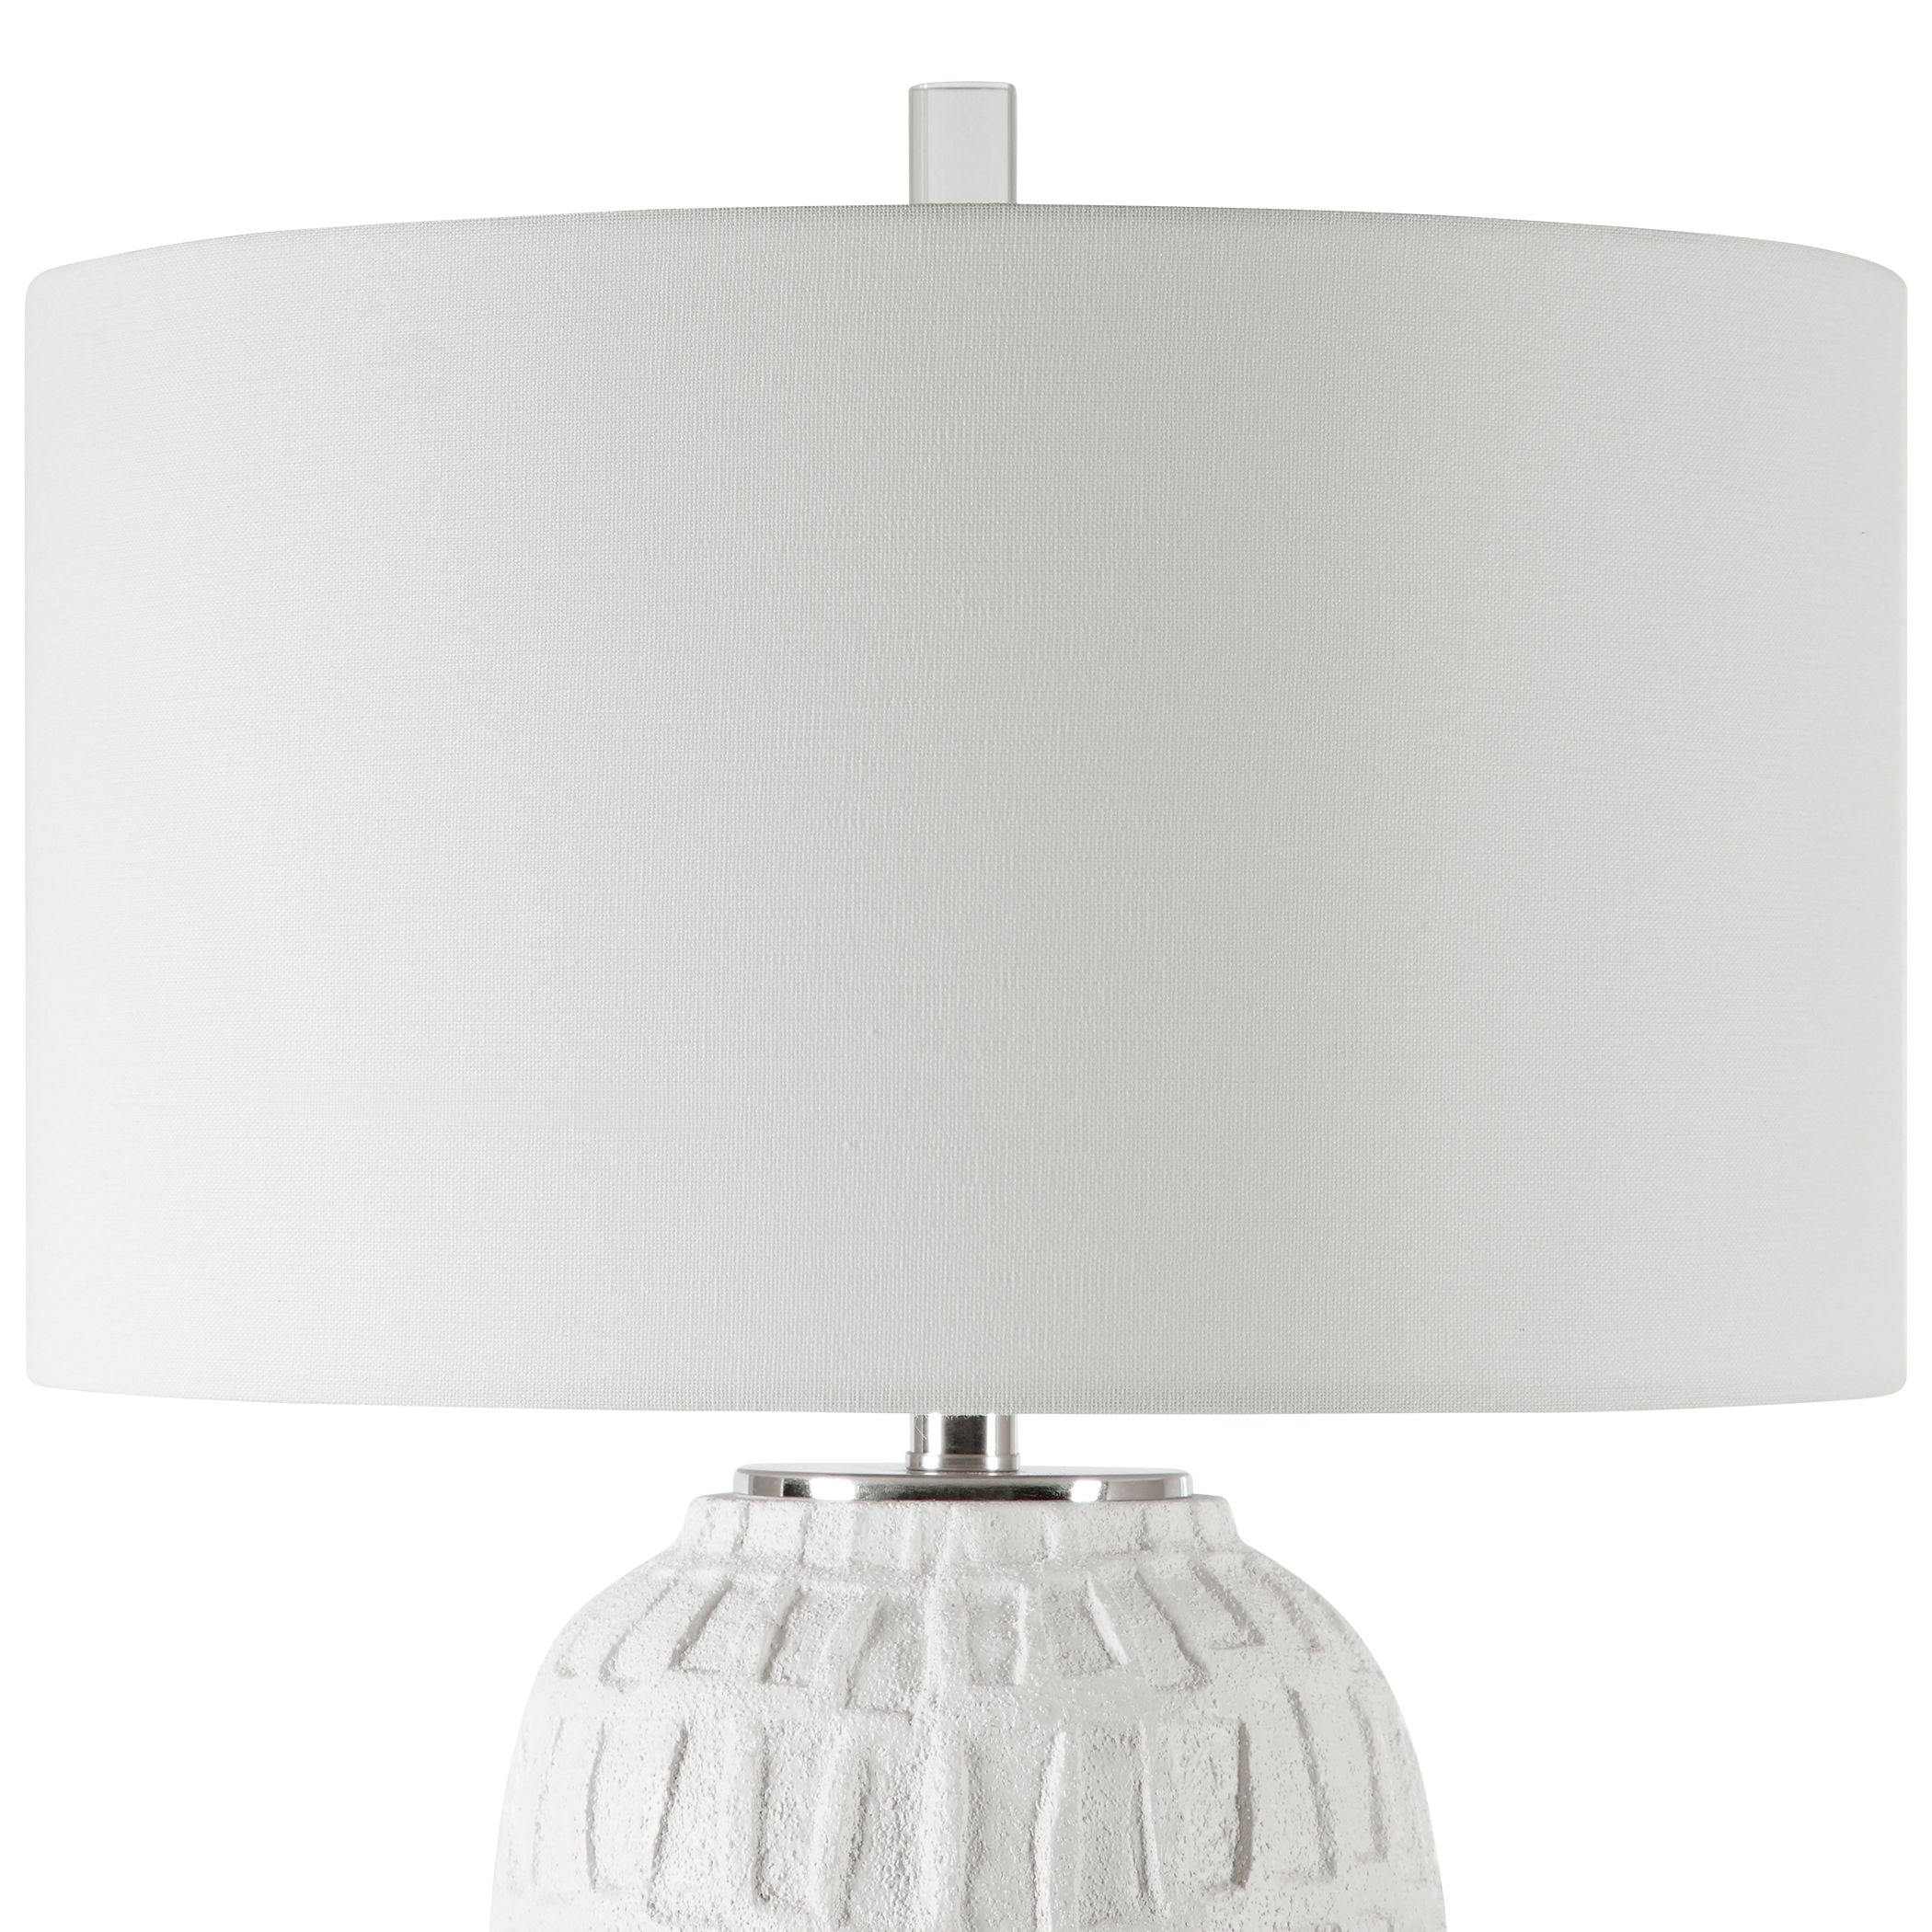 Caelina - Textured Table Lamp - White